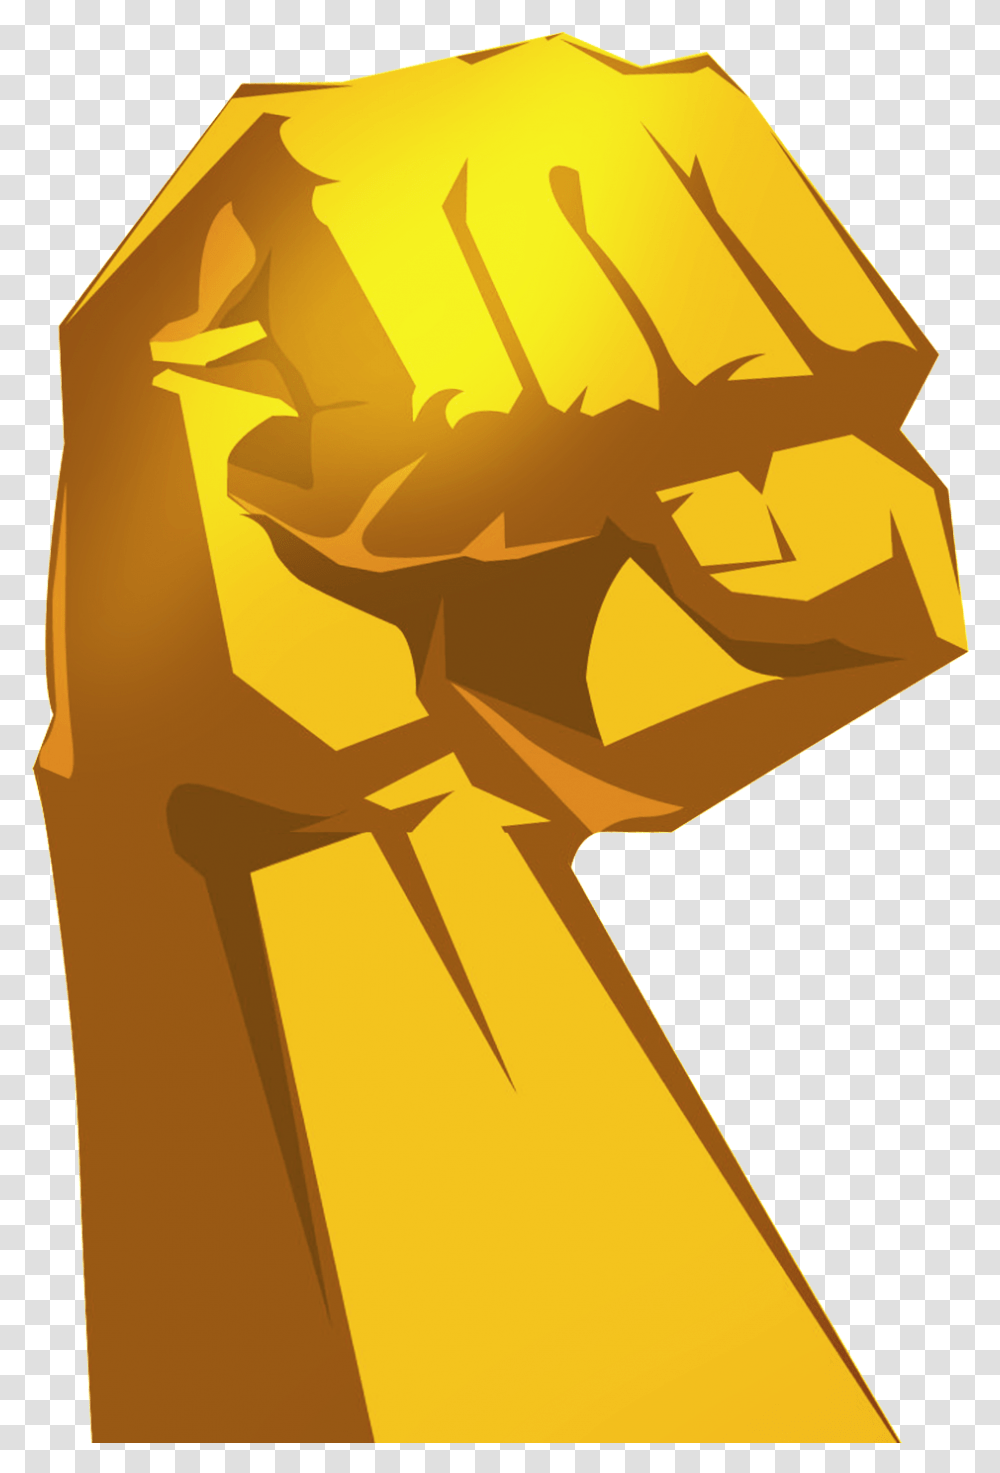 Fist Clipart Strength Hard Working, Hand, Gold, Trophy Transparent Png